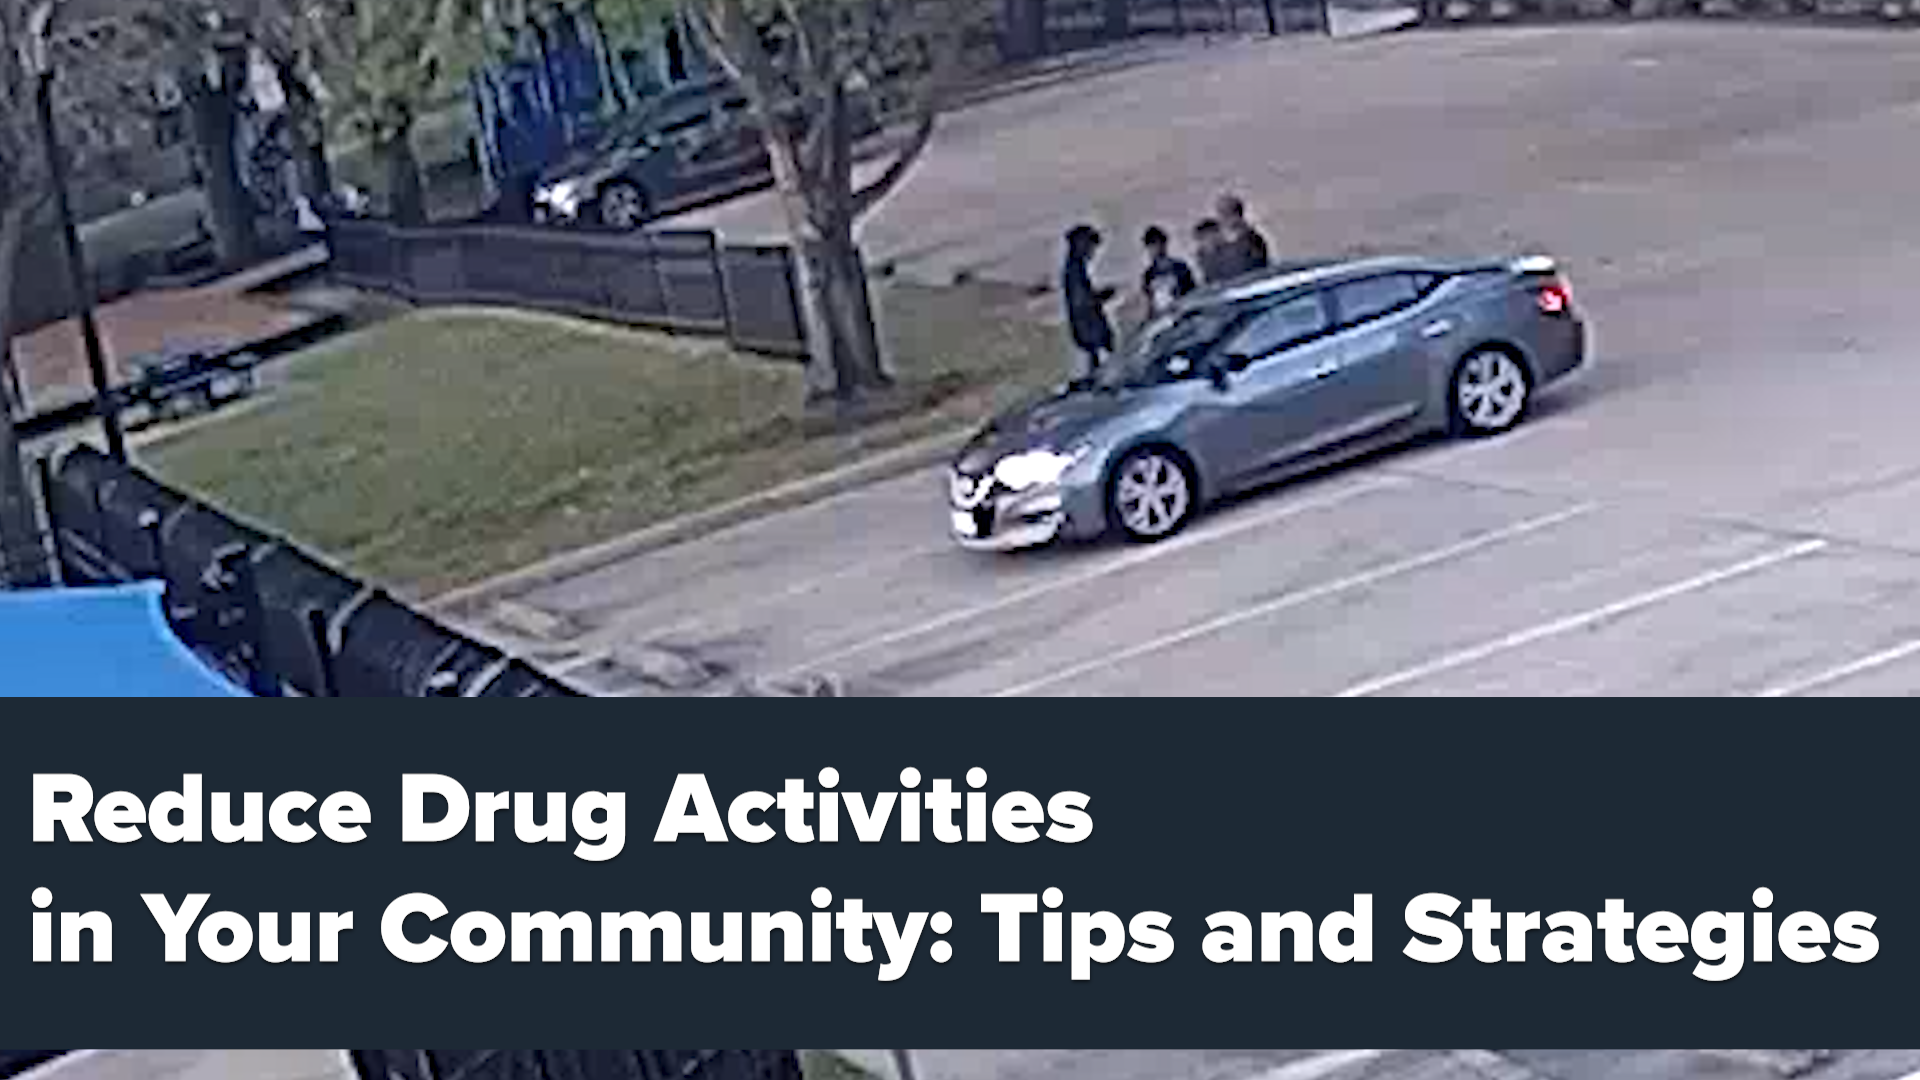 Tips to Reducing Drug Activity in Your Community